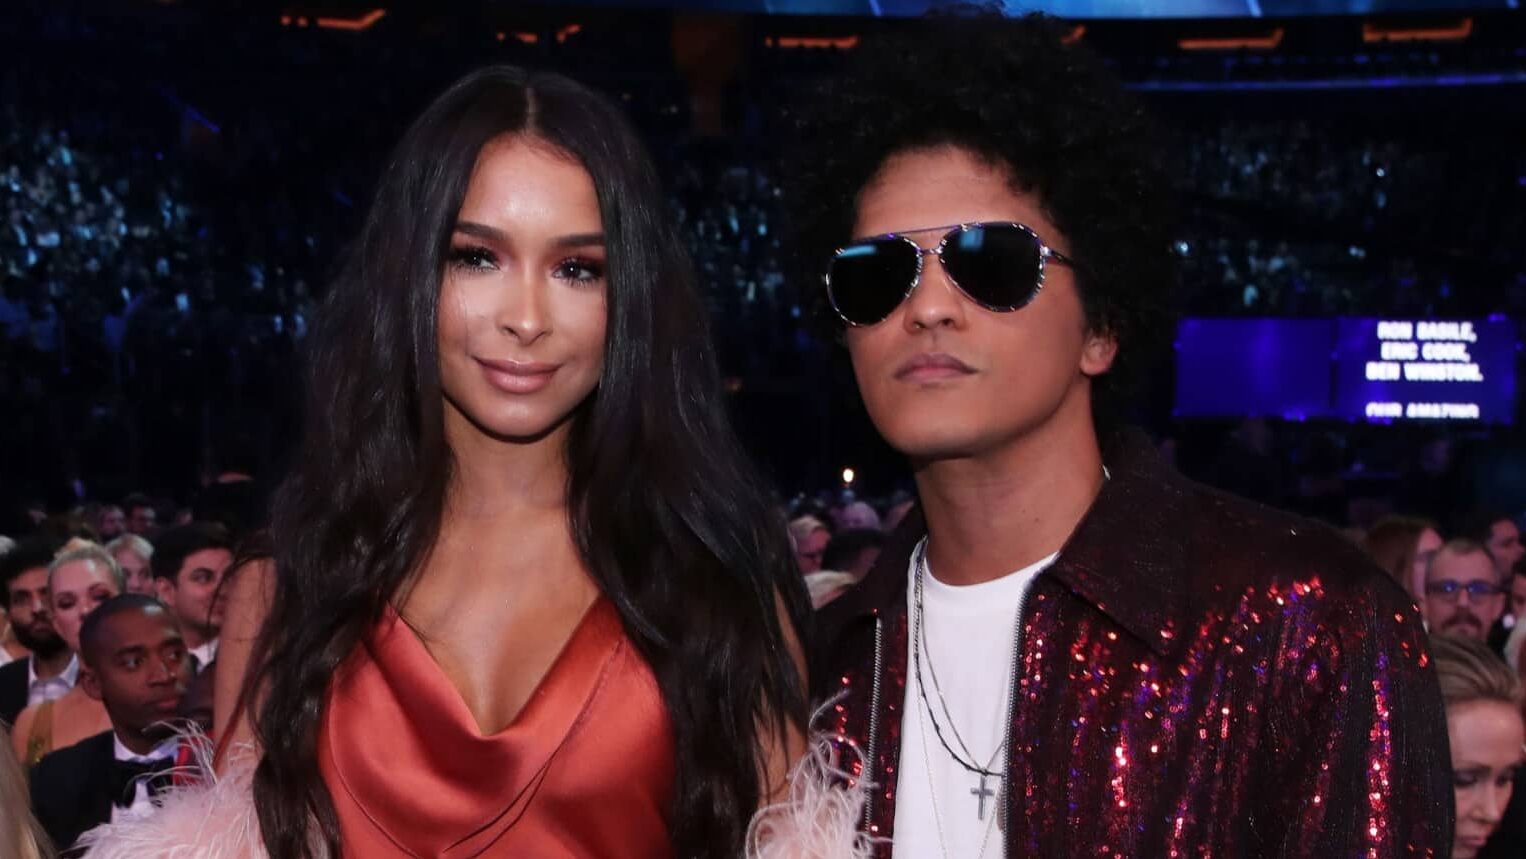 Who are Bruno Mars’ wife and kids?